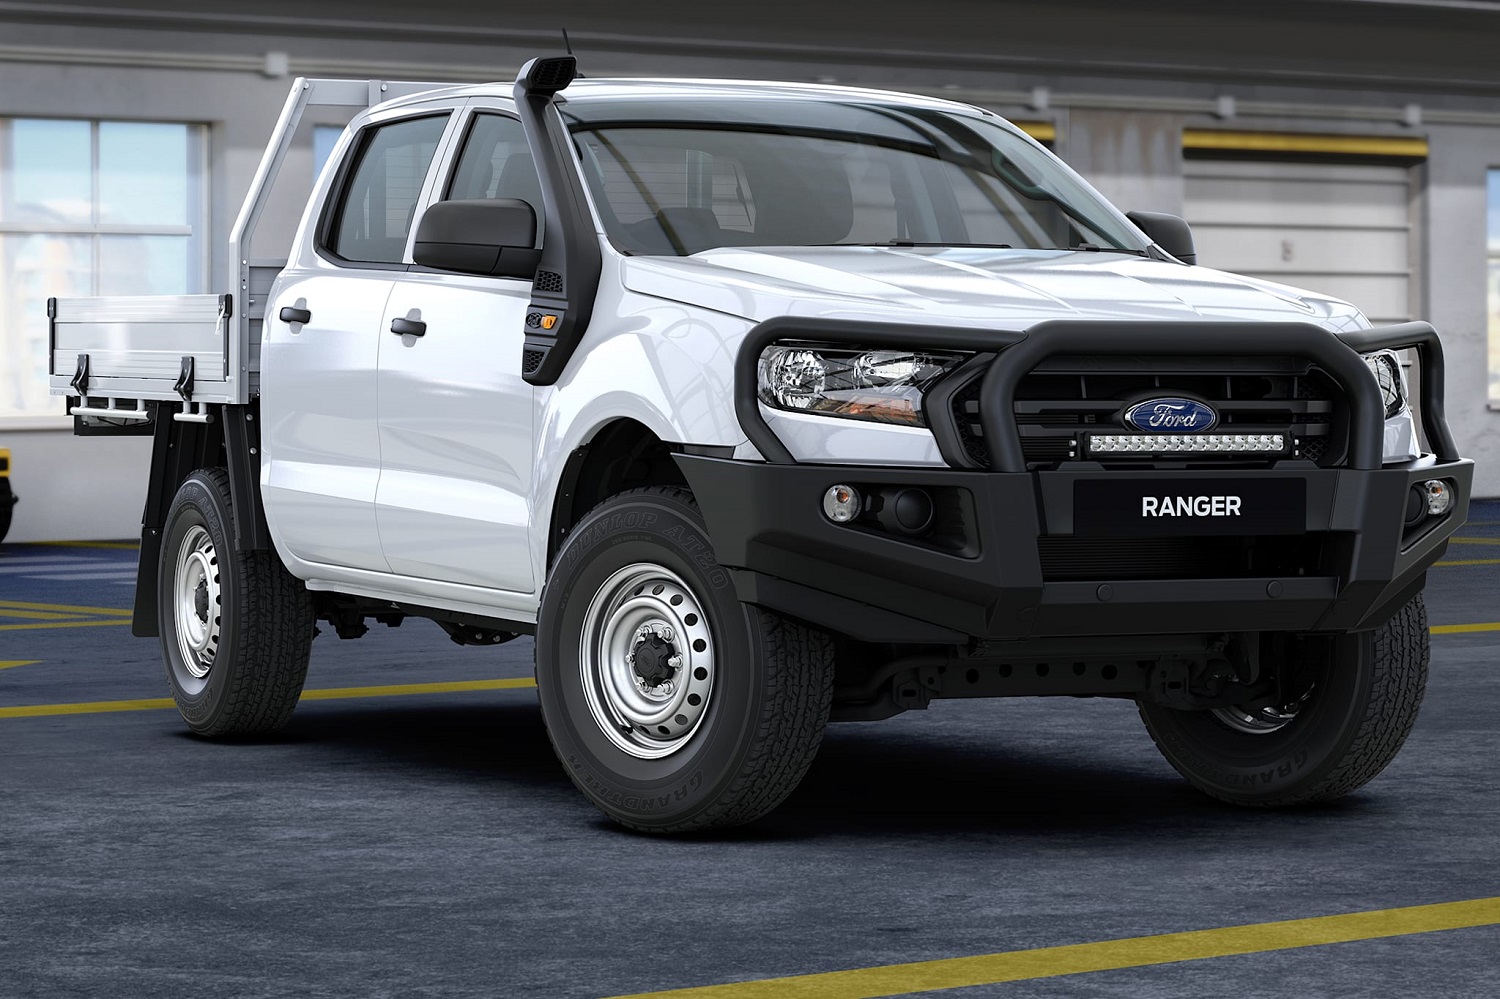 Australian Ford Ranger Lineup Expands With New Variants, Features